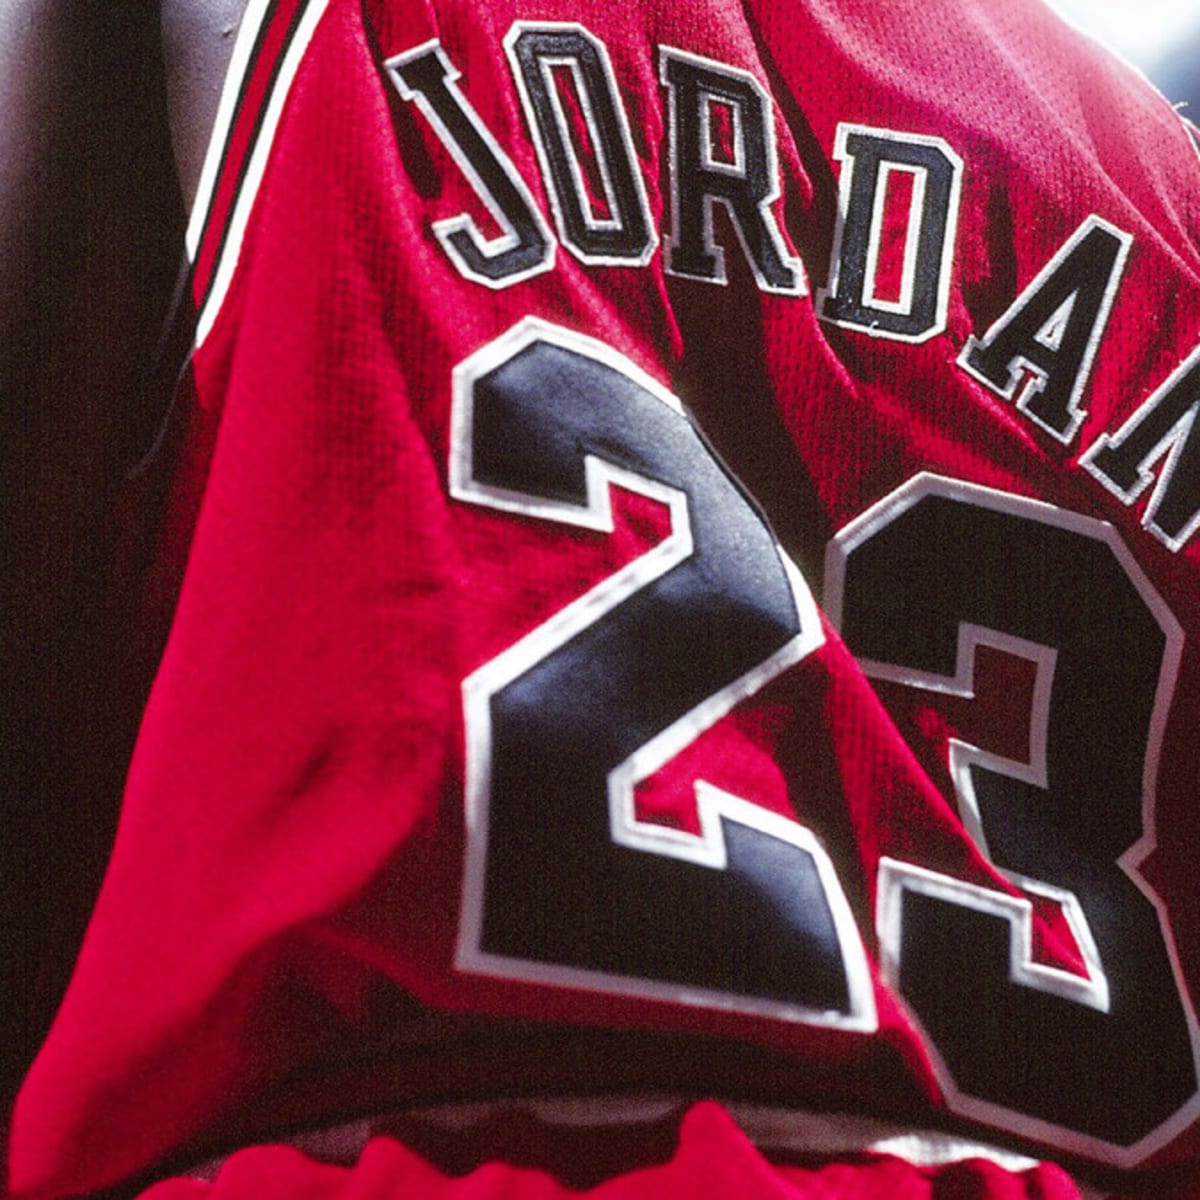 Lesson learned: Around Jordan, teammates saw price of fame